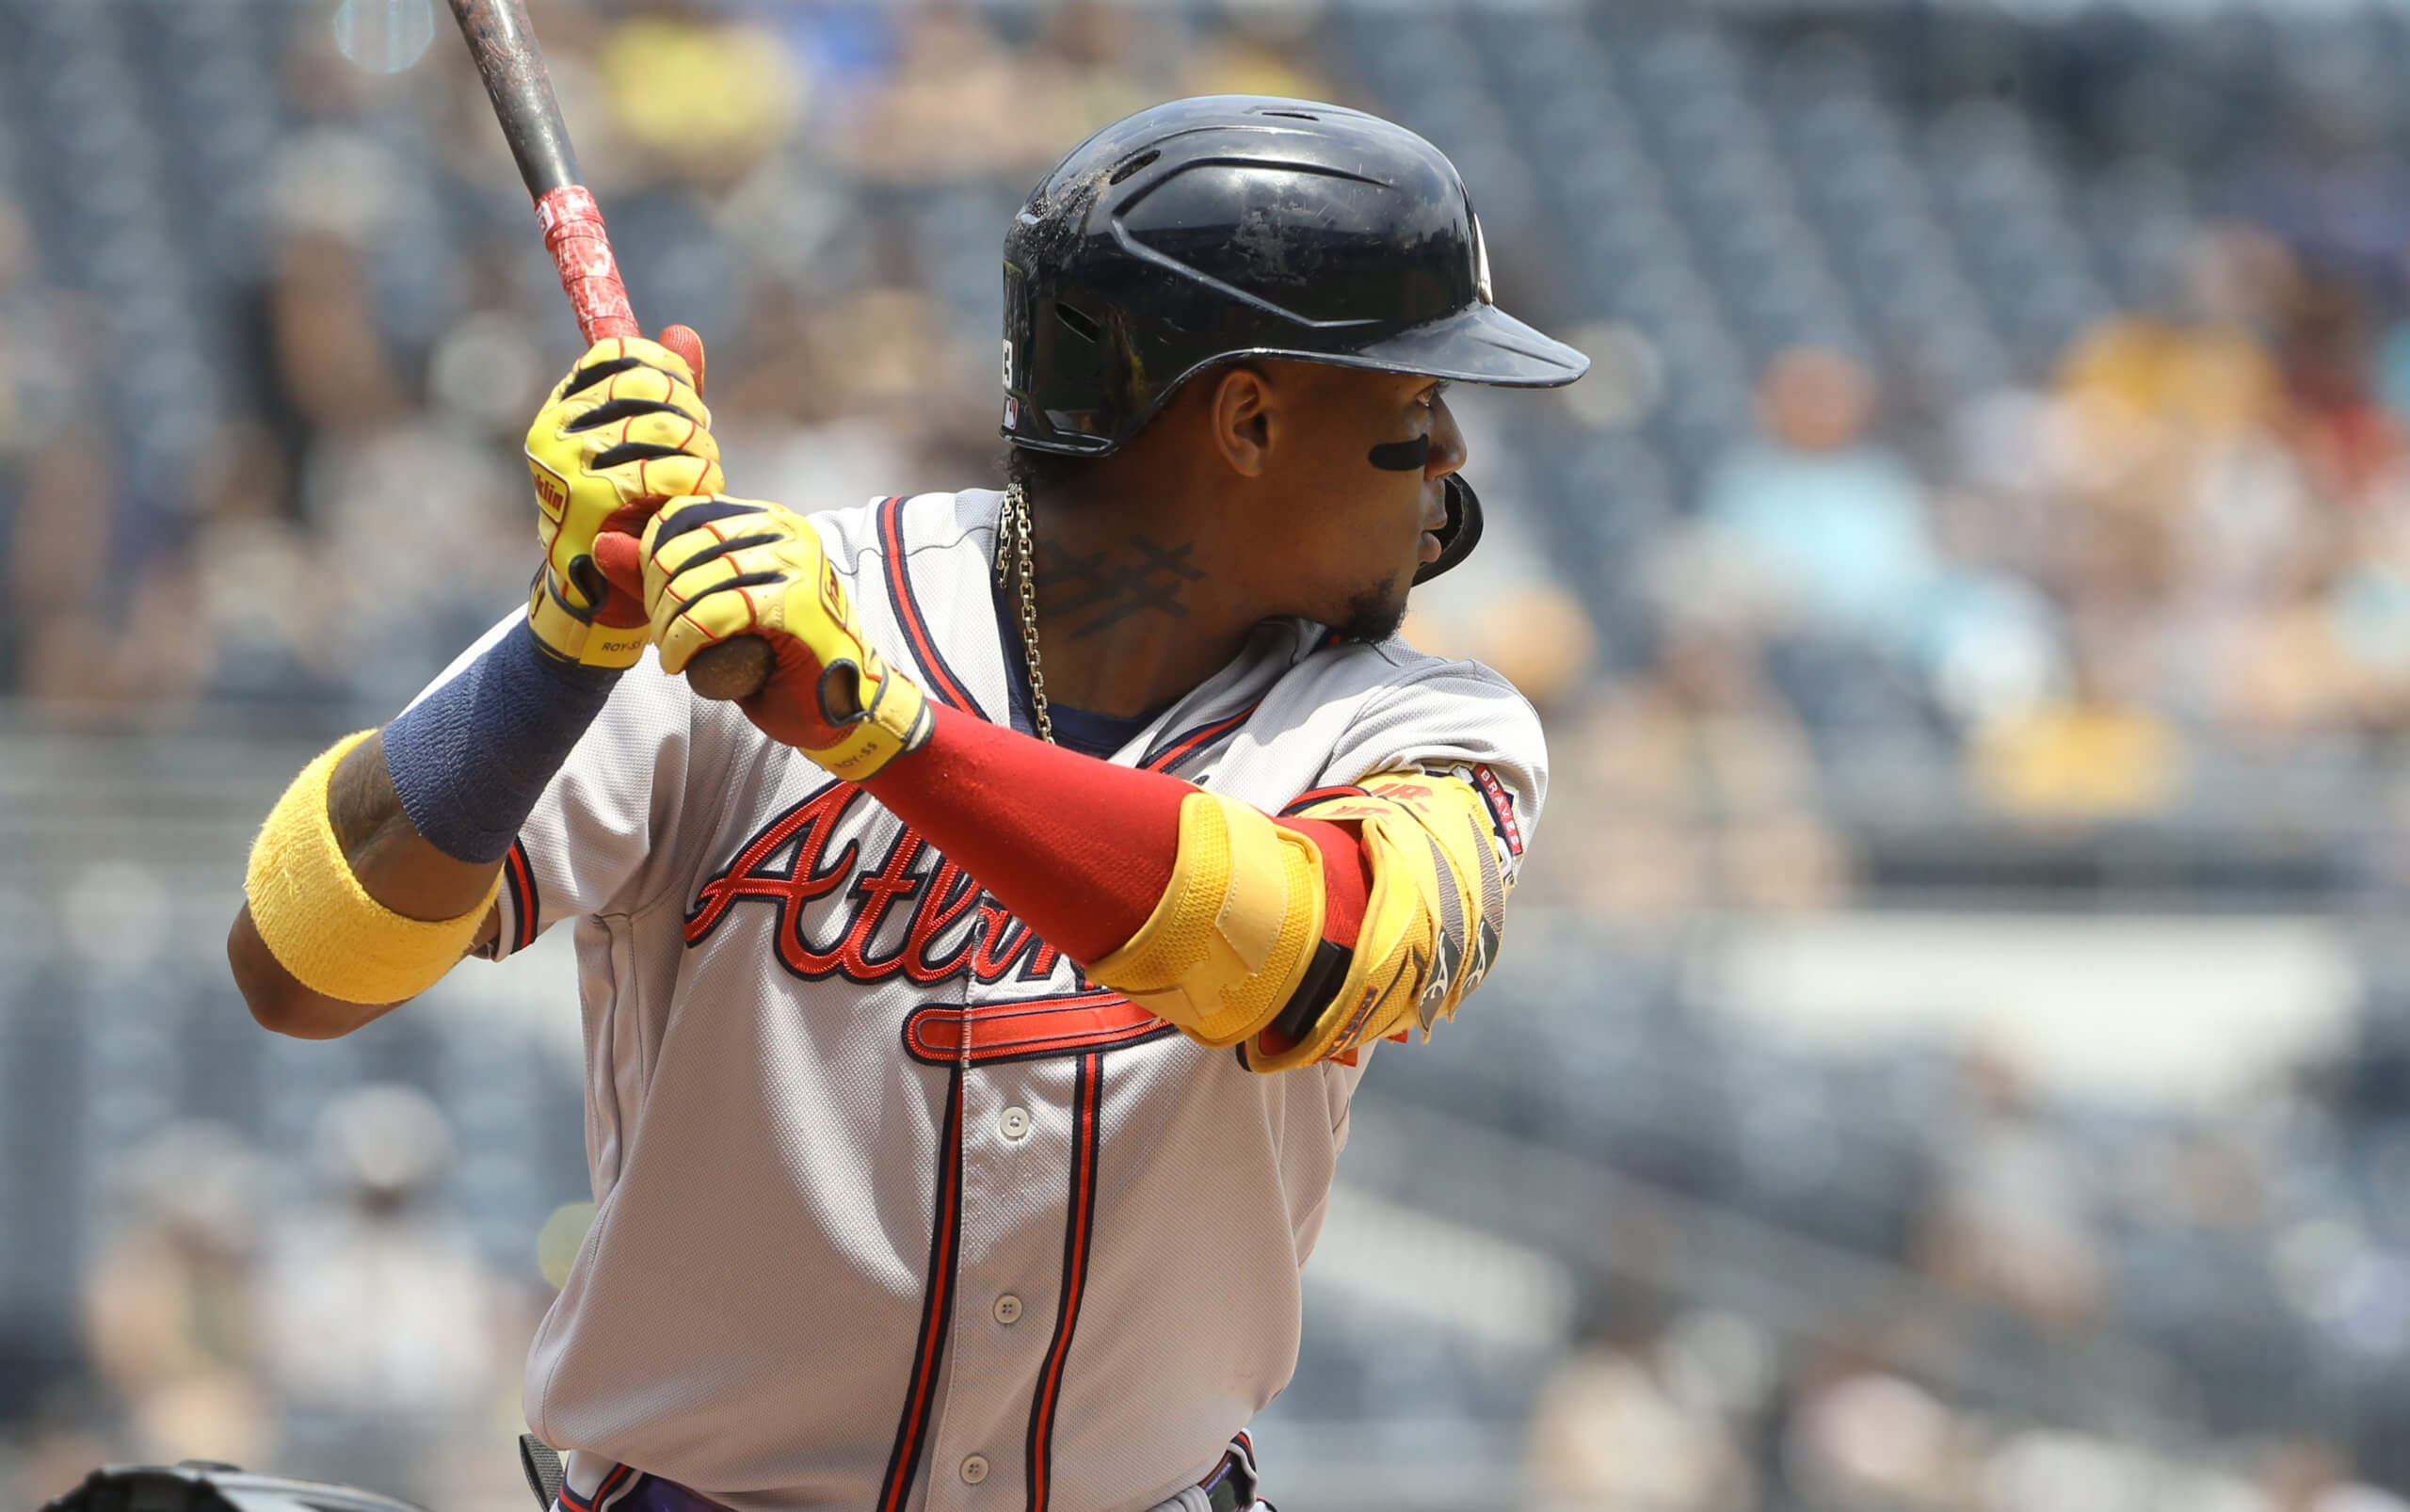 The Beast' Is Born: 21-Year-Old Ronald Acuna Jr. Is the New King